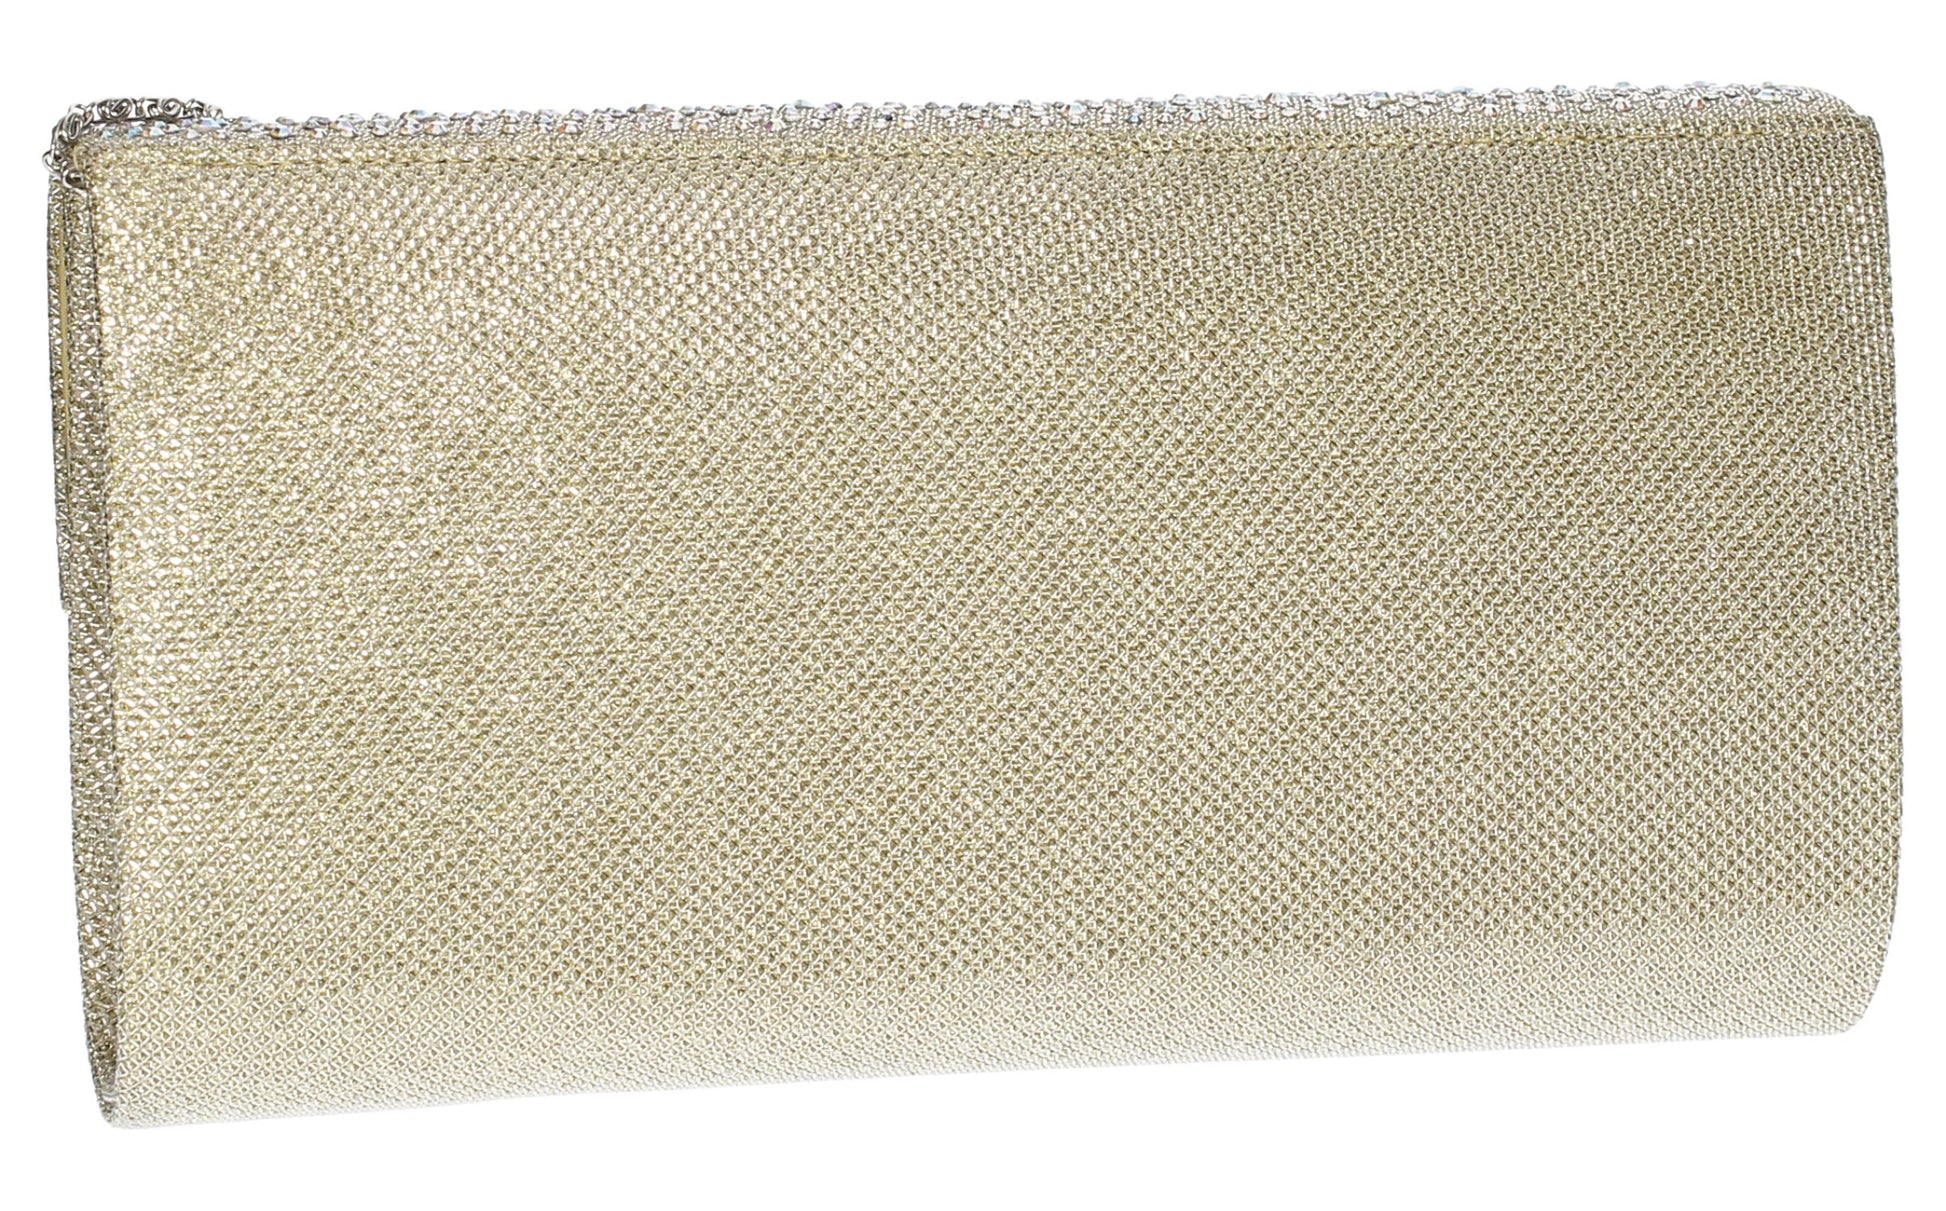 SWANKYSWANS Montary Clutch Bag Gold Cute Cheap Clutch Bag For Weddings School and Work